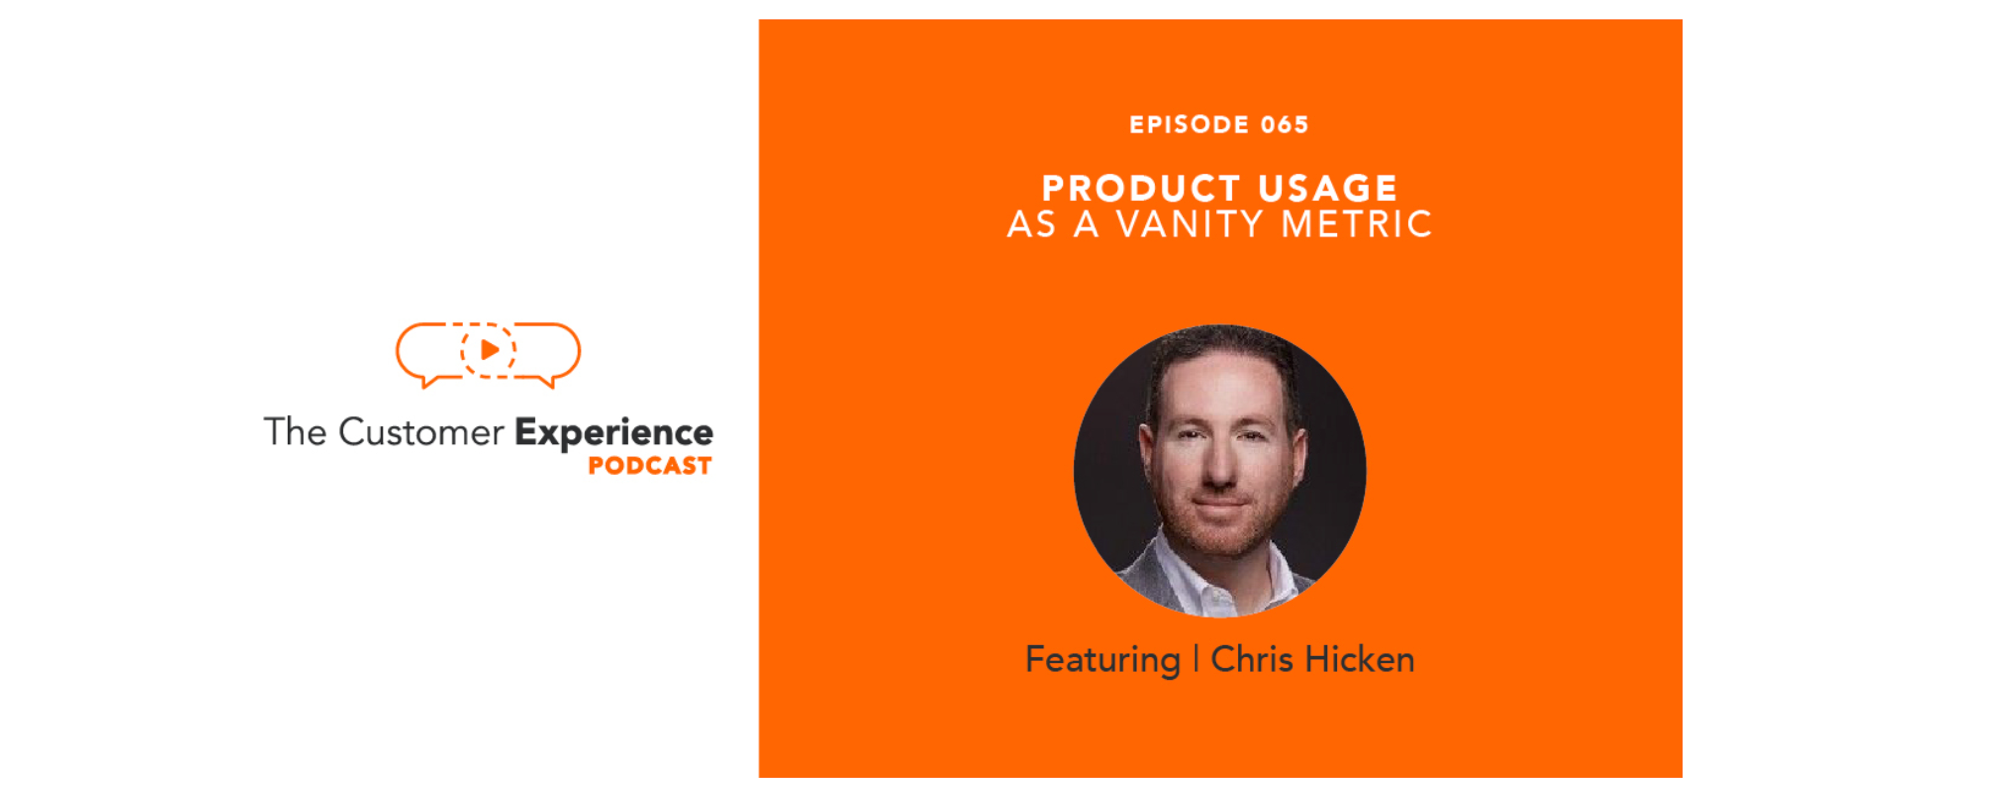 [Podcast] Product usage is a vanity metric